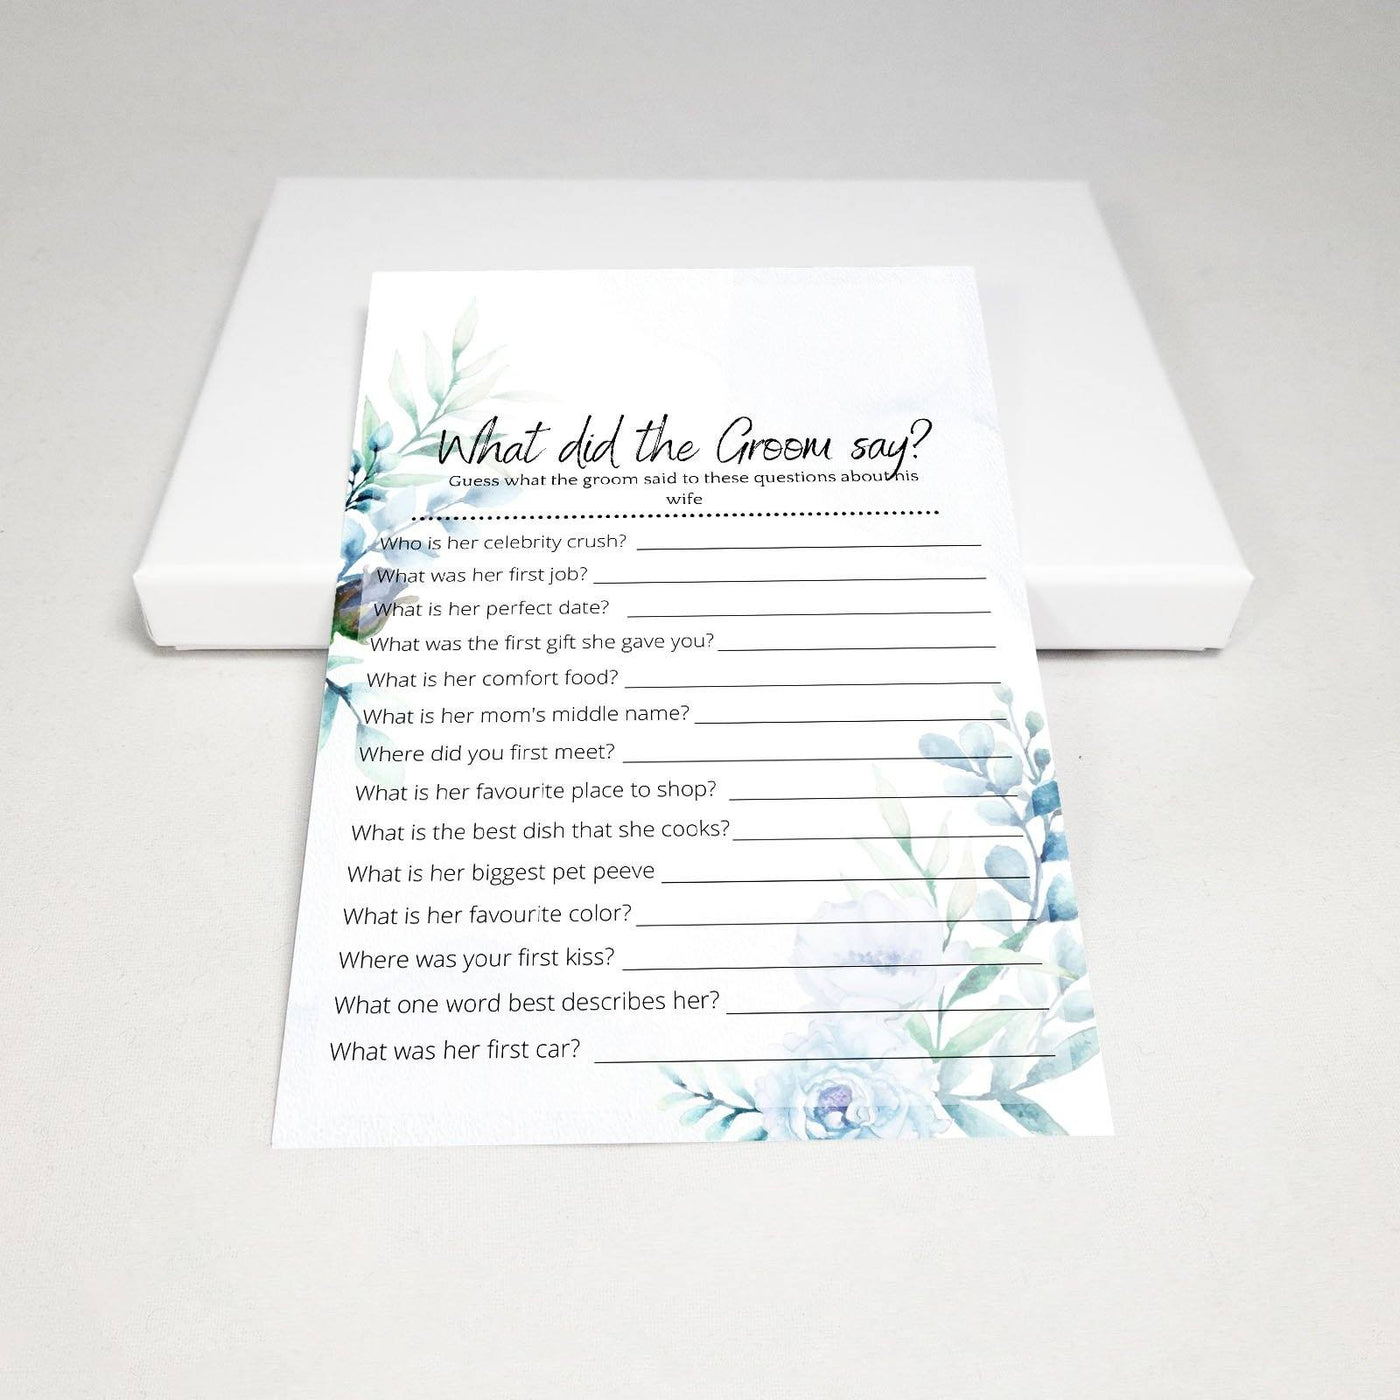 Watercolor Meadow - What Did The Groom Say? | Bridal Shower Game Party Games Your Party Games 